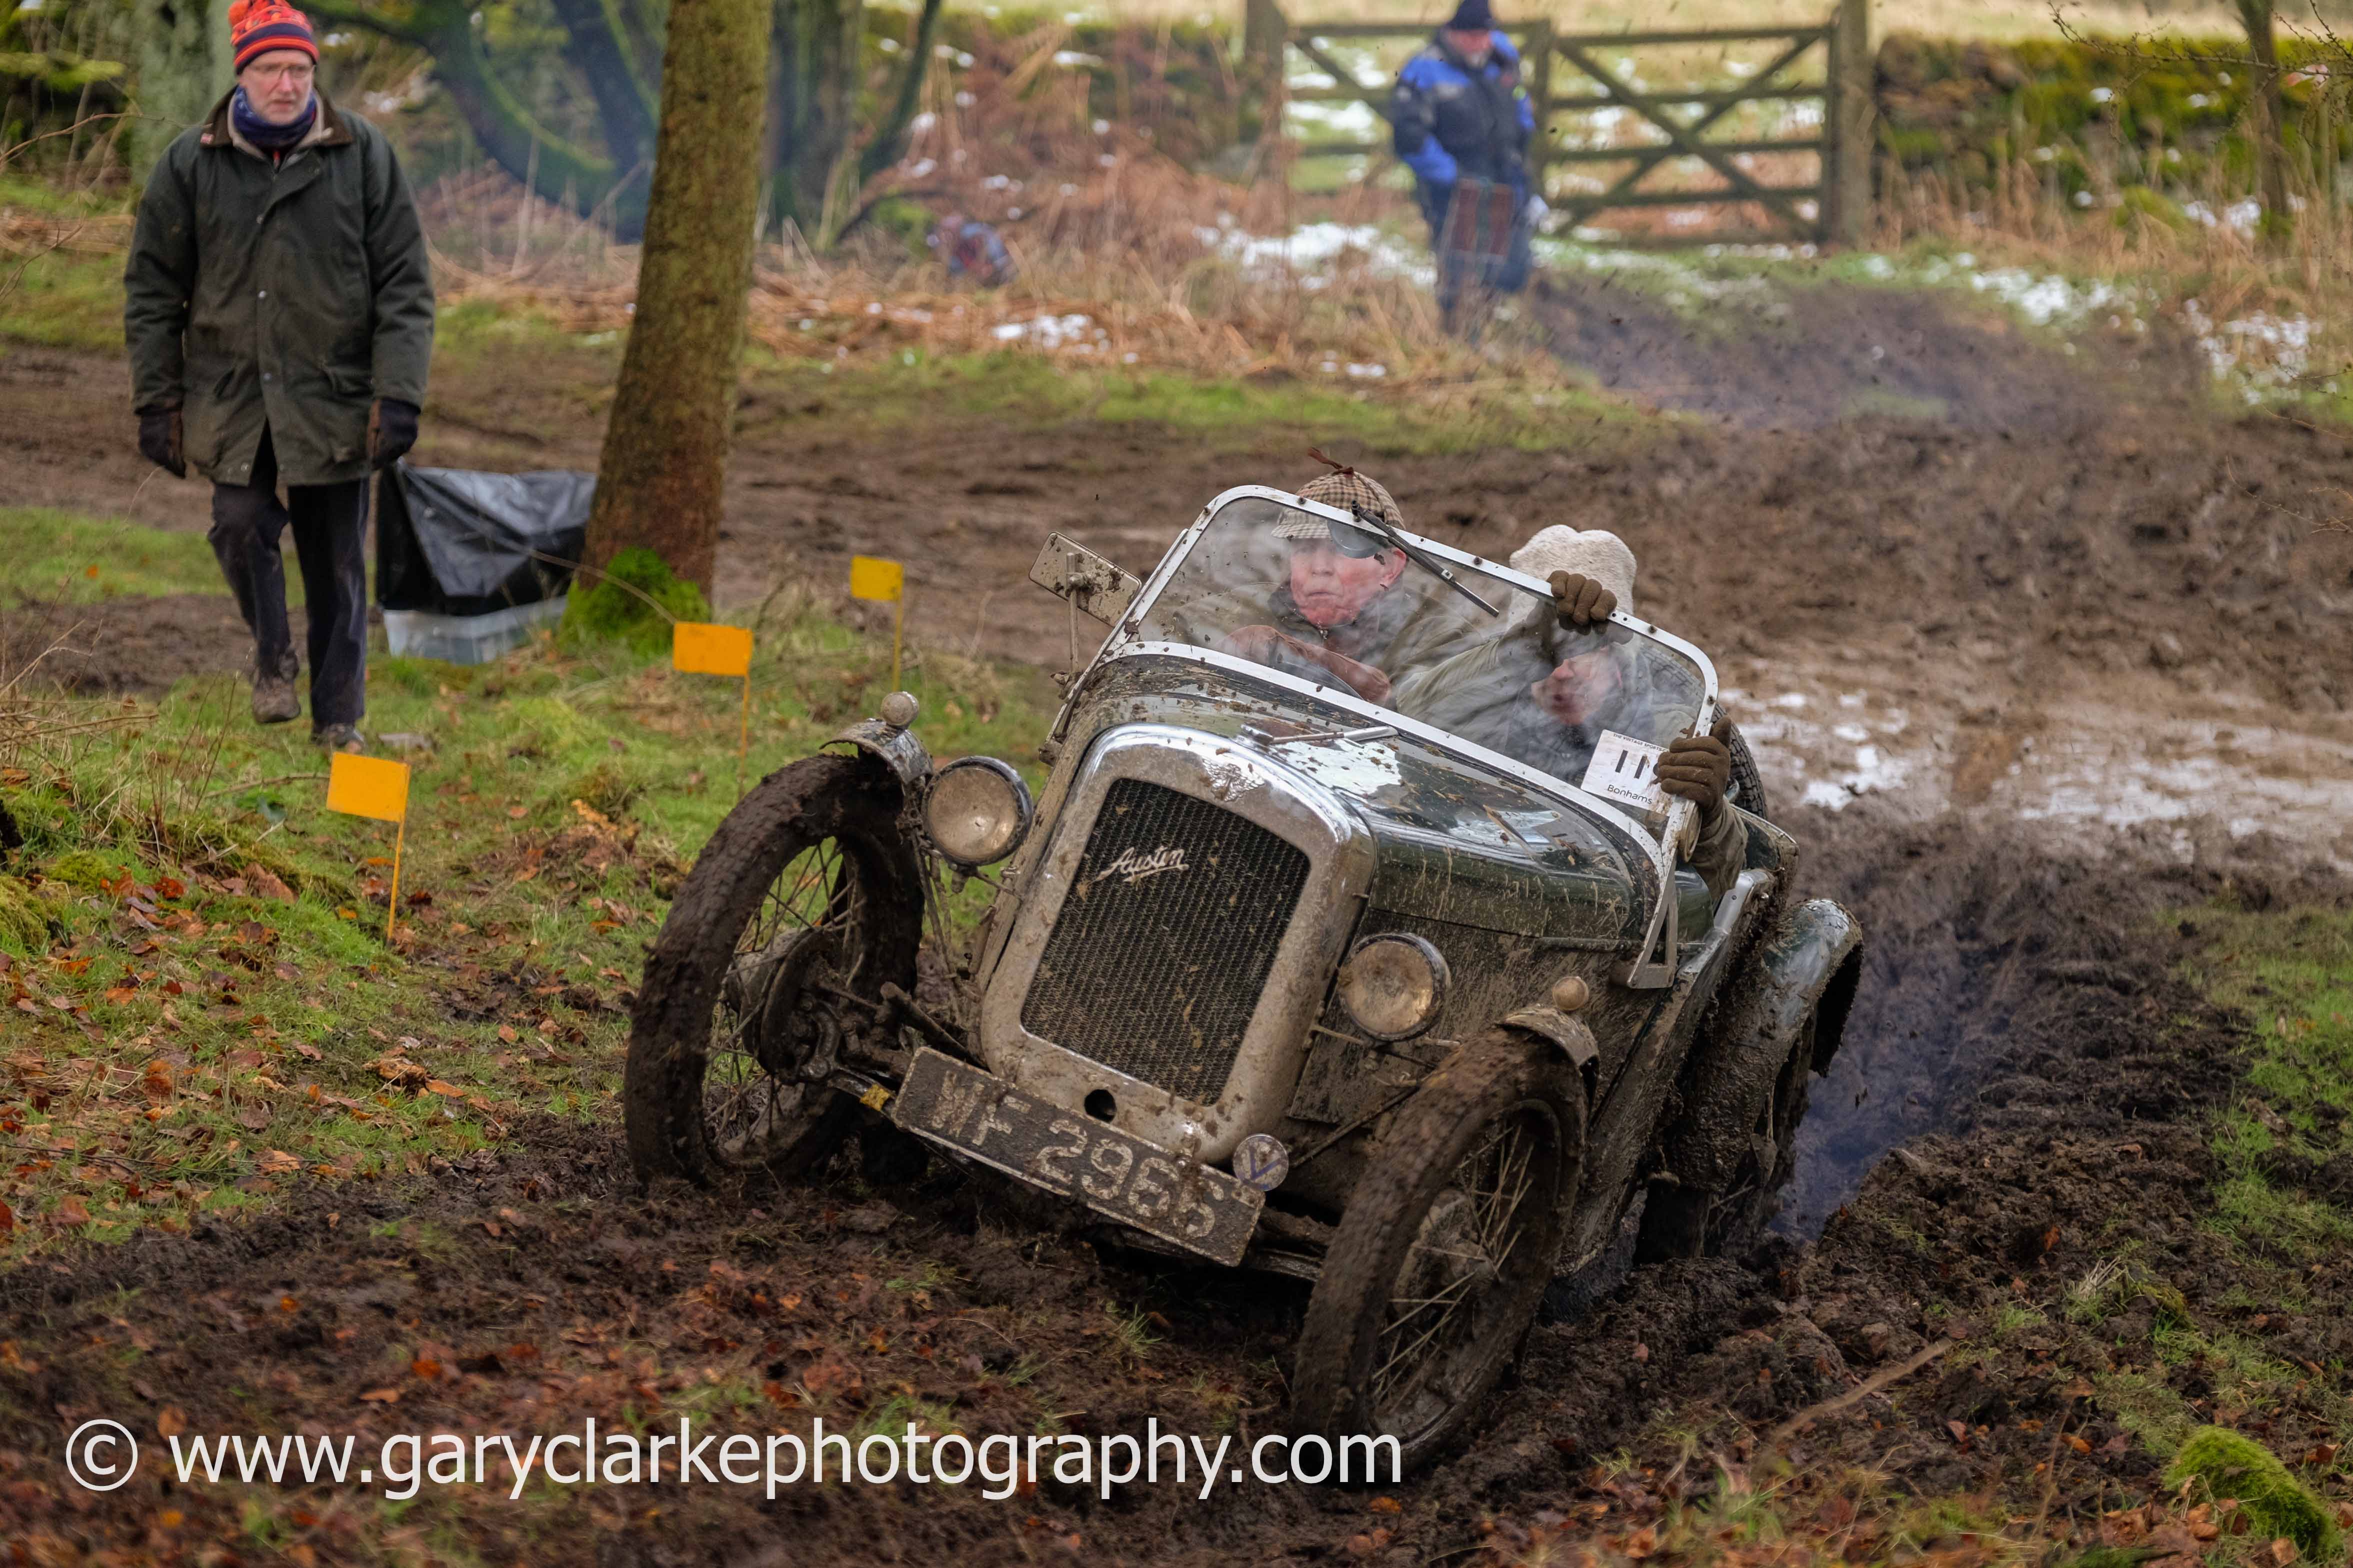 Derbyshire awaits the VSCC John Harris Trial this weekend cover